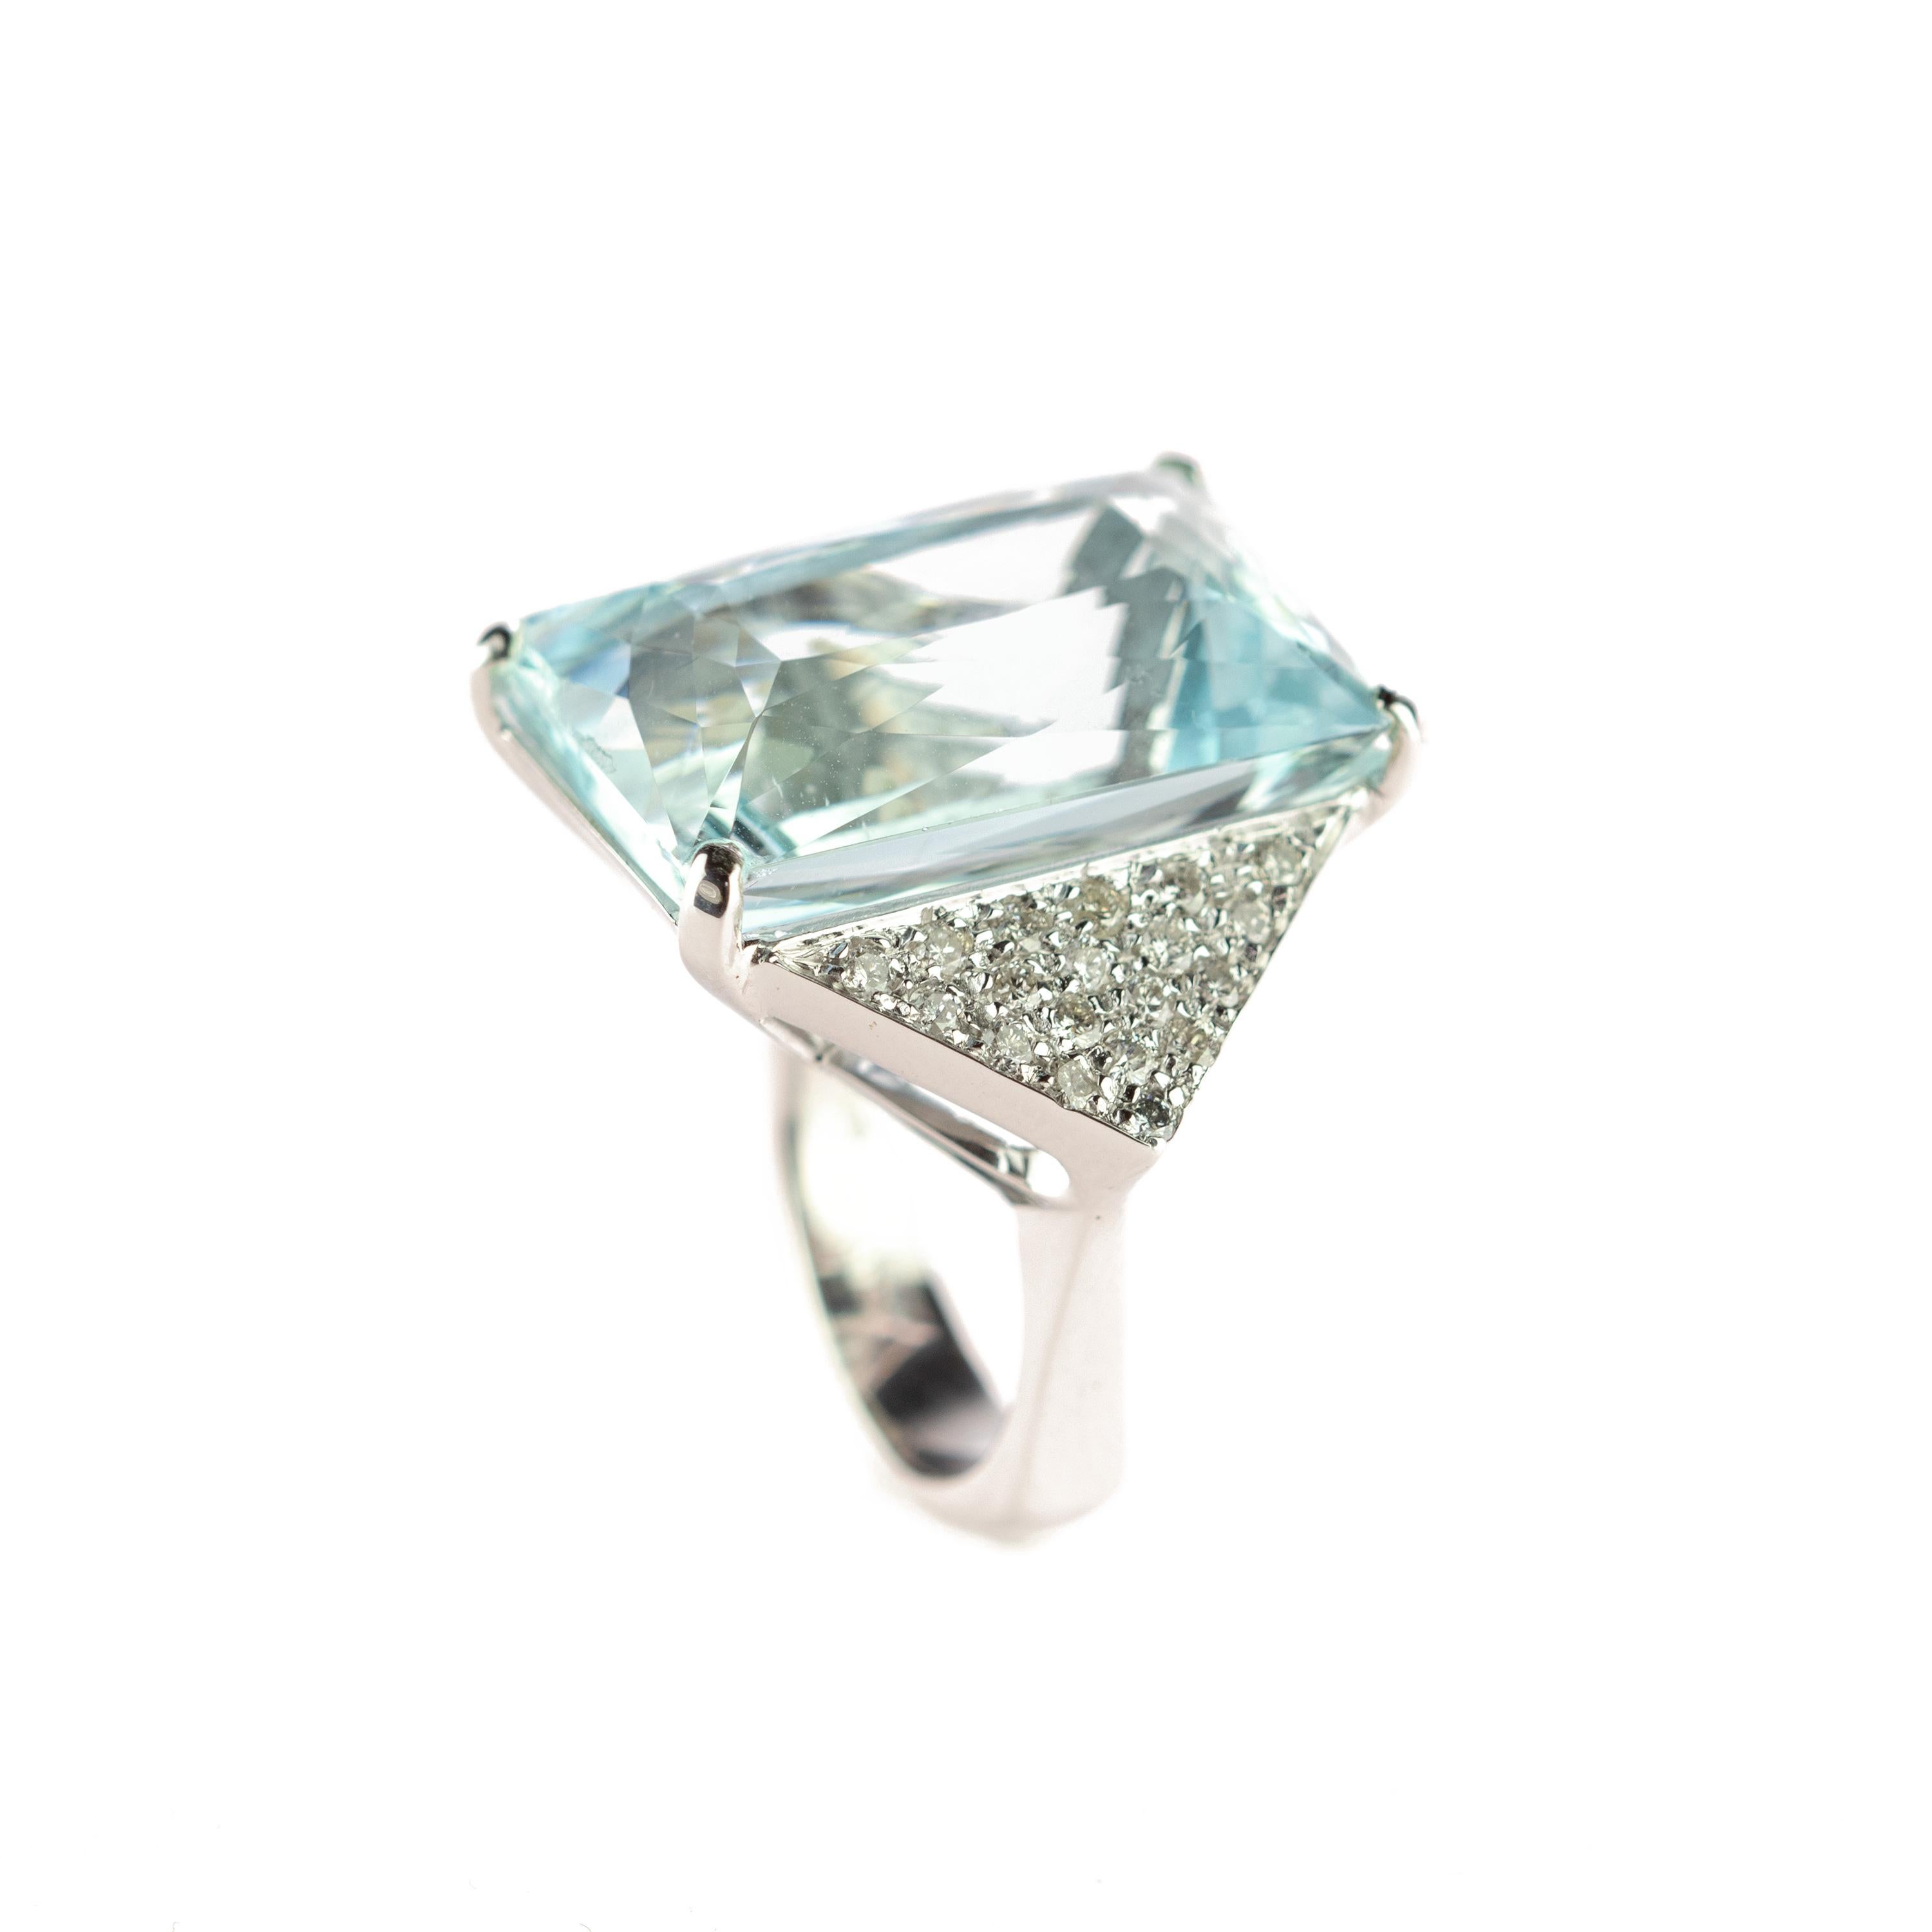 An impressive clear natural Aquamarine gemstone and Diamond statement ring on a studded 18k white gold (34.5 carats). This epic statement ring is an outstanding display of color and Italian craftsmanship.

Inspired in the spirit of the sea. The